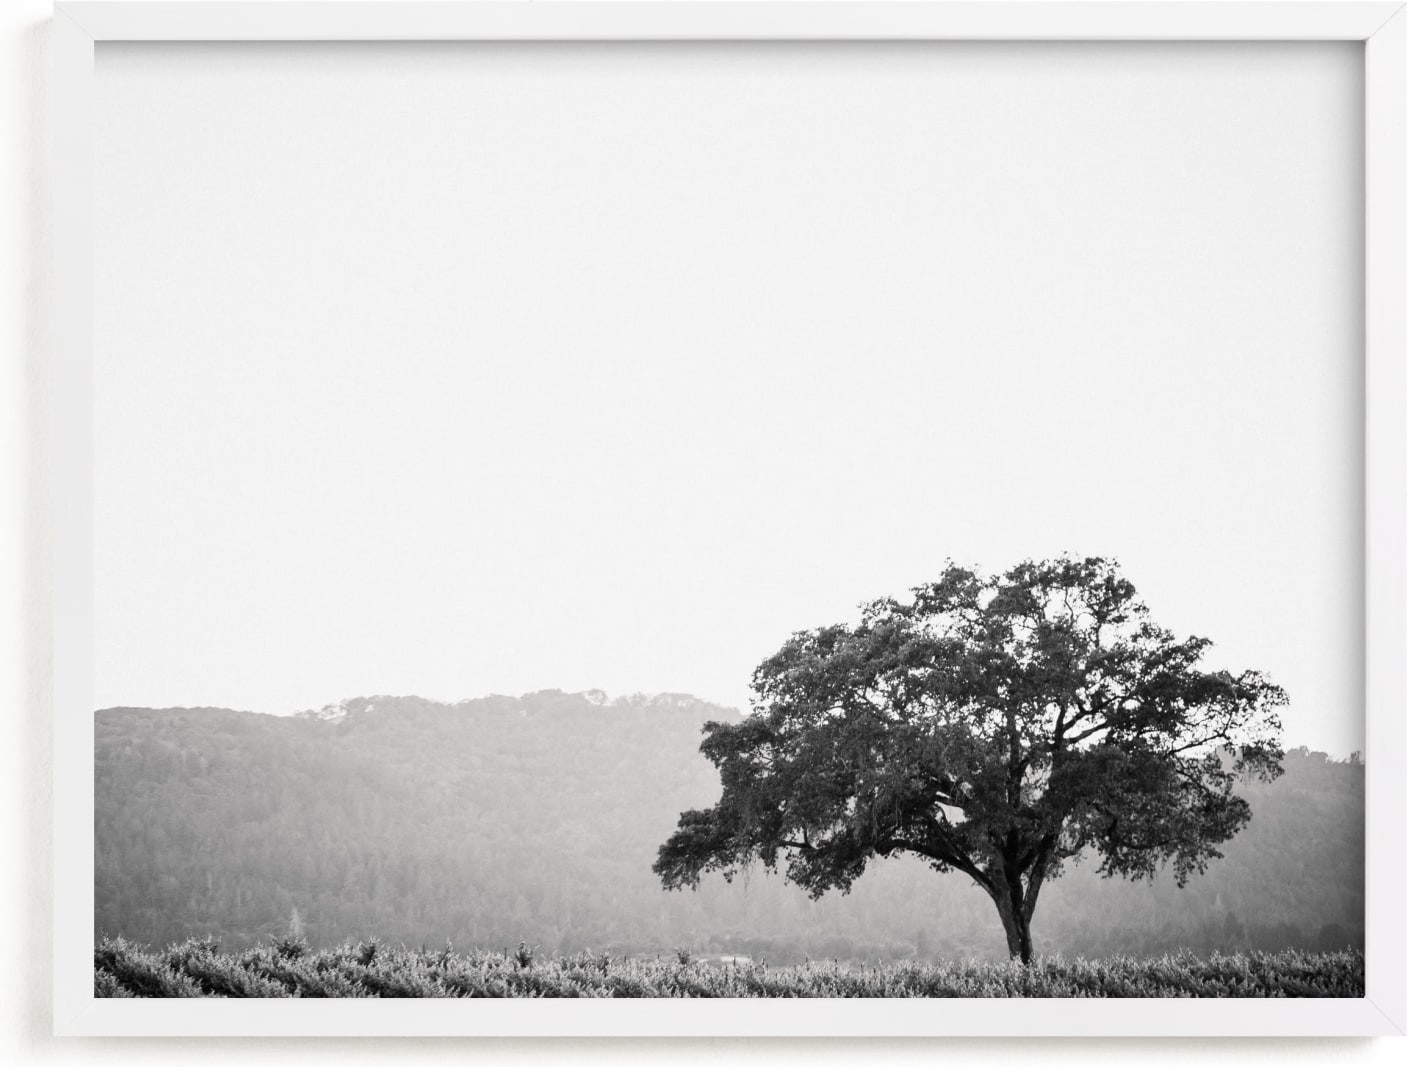 This is a black and white art by Lindsay Ferraris Photography called Wild Oak.